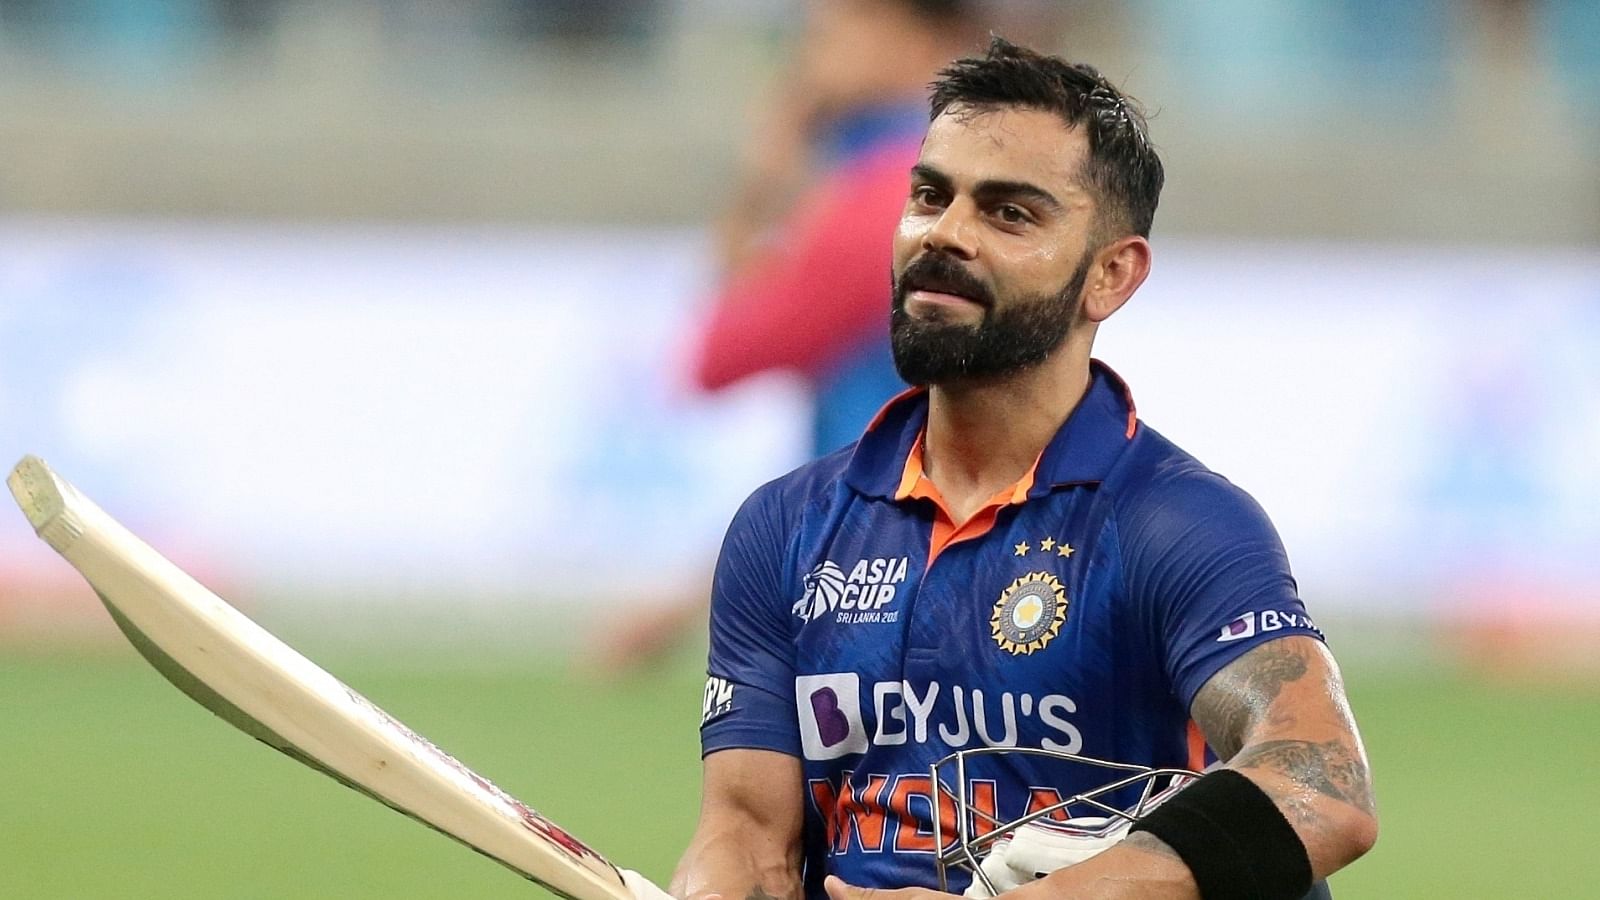 Kohli recently ended a wait of 1,020 days for his 71st international hundred when he smashed 122 not out off 61 balls against Afghanistan in the Asia Cup. Credit: IANS Photo